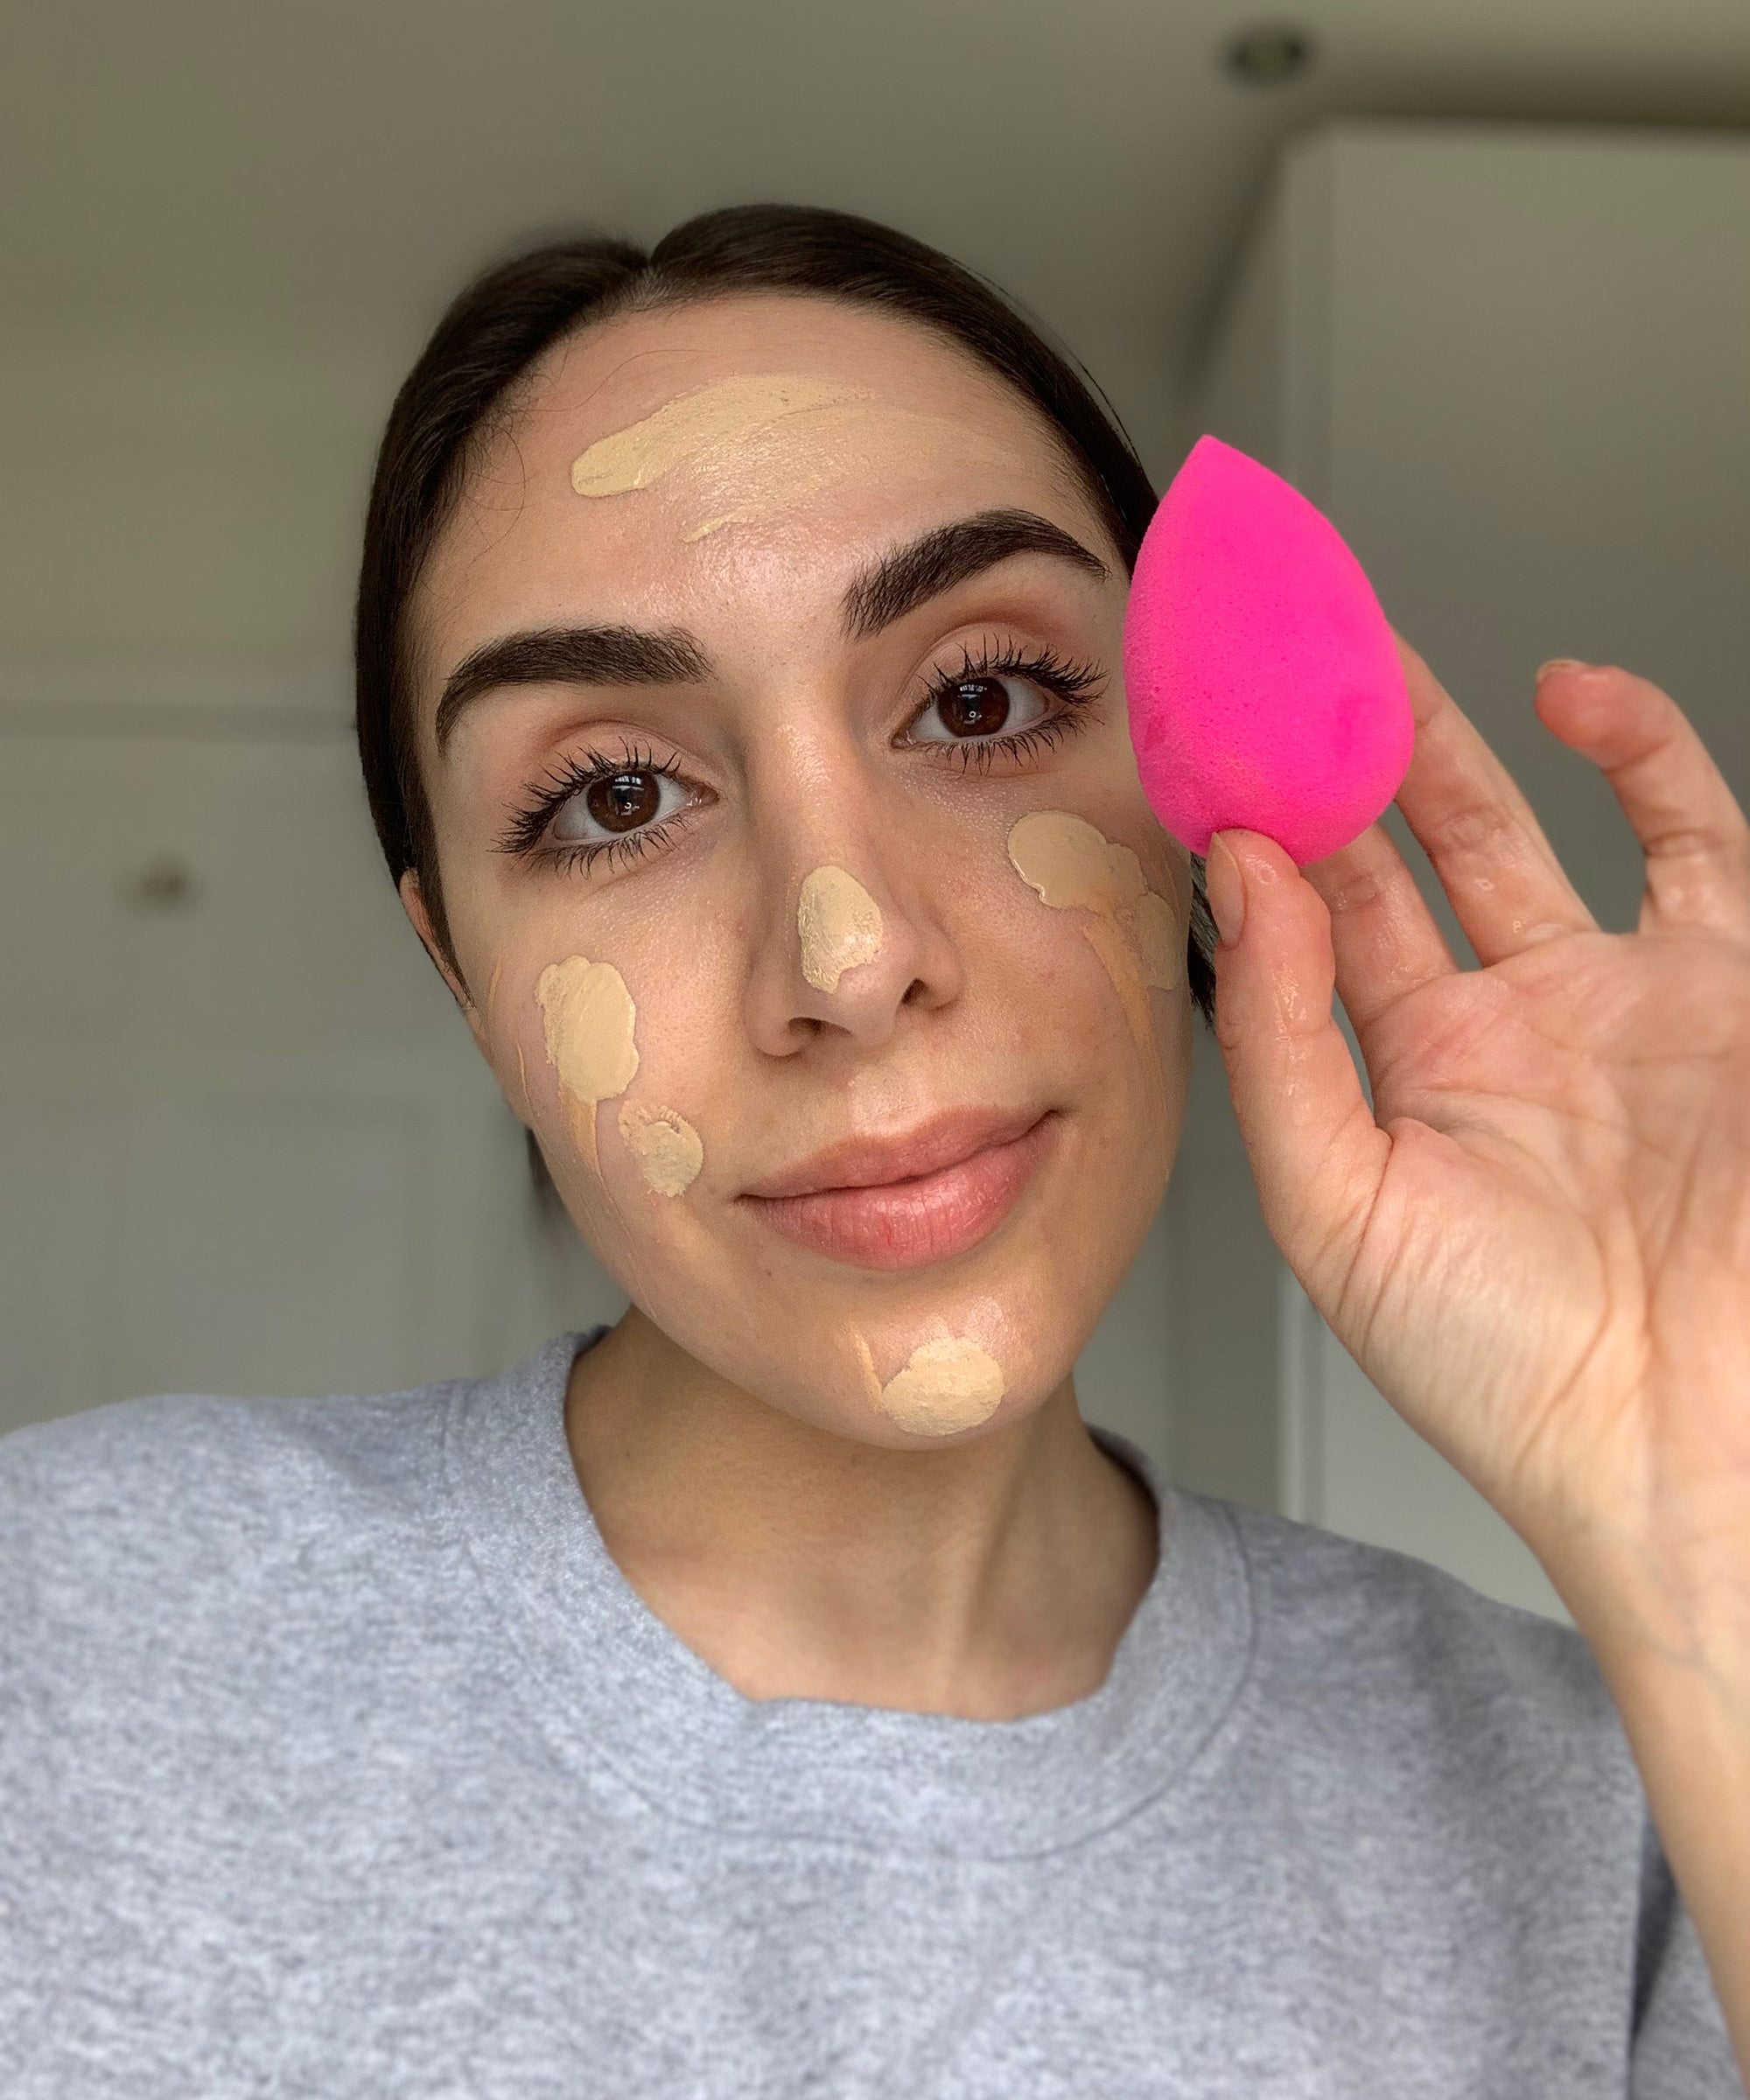 e.l.f. Cosmetics on Instagram: “Here's how we use our NEW Contour